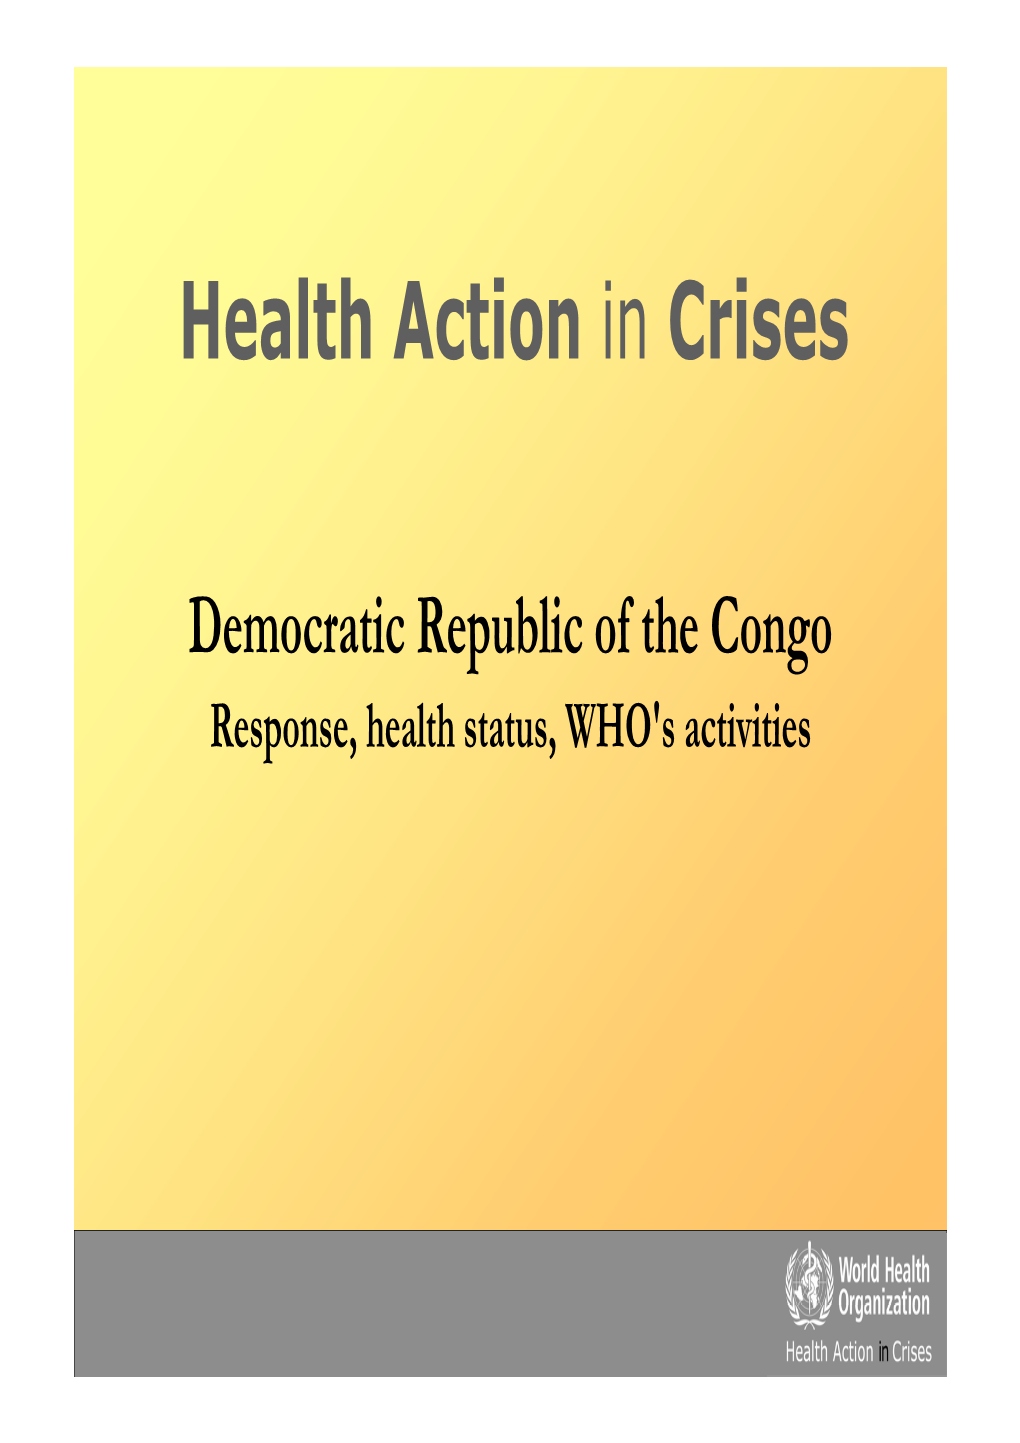 Health Action in Crises